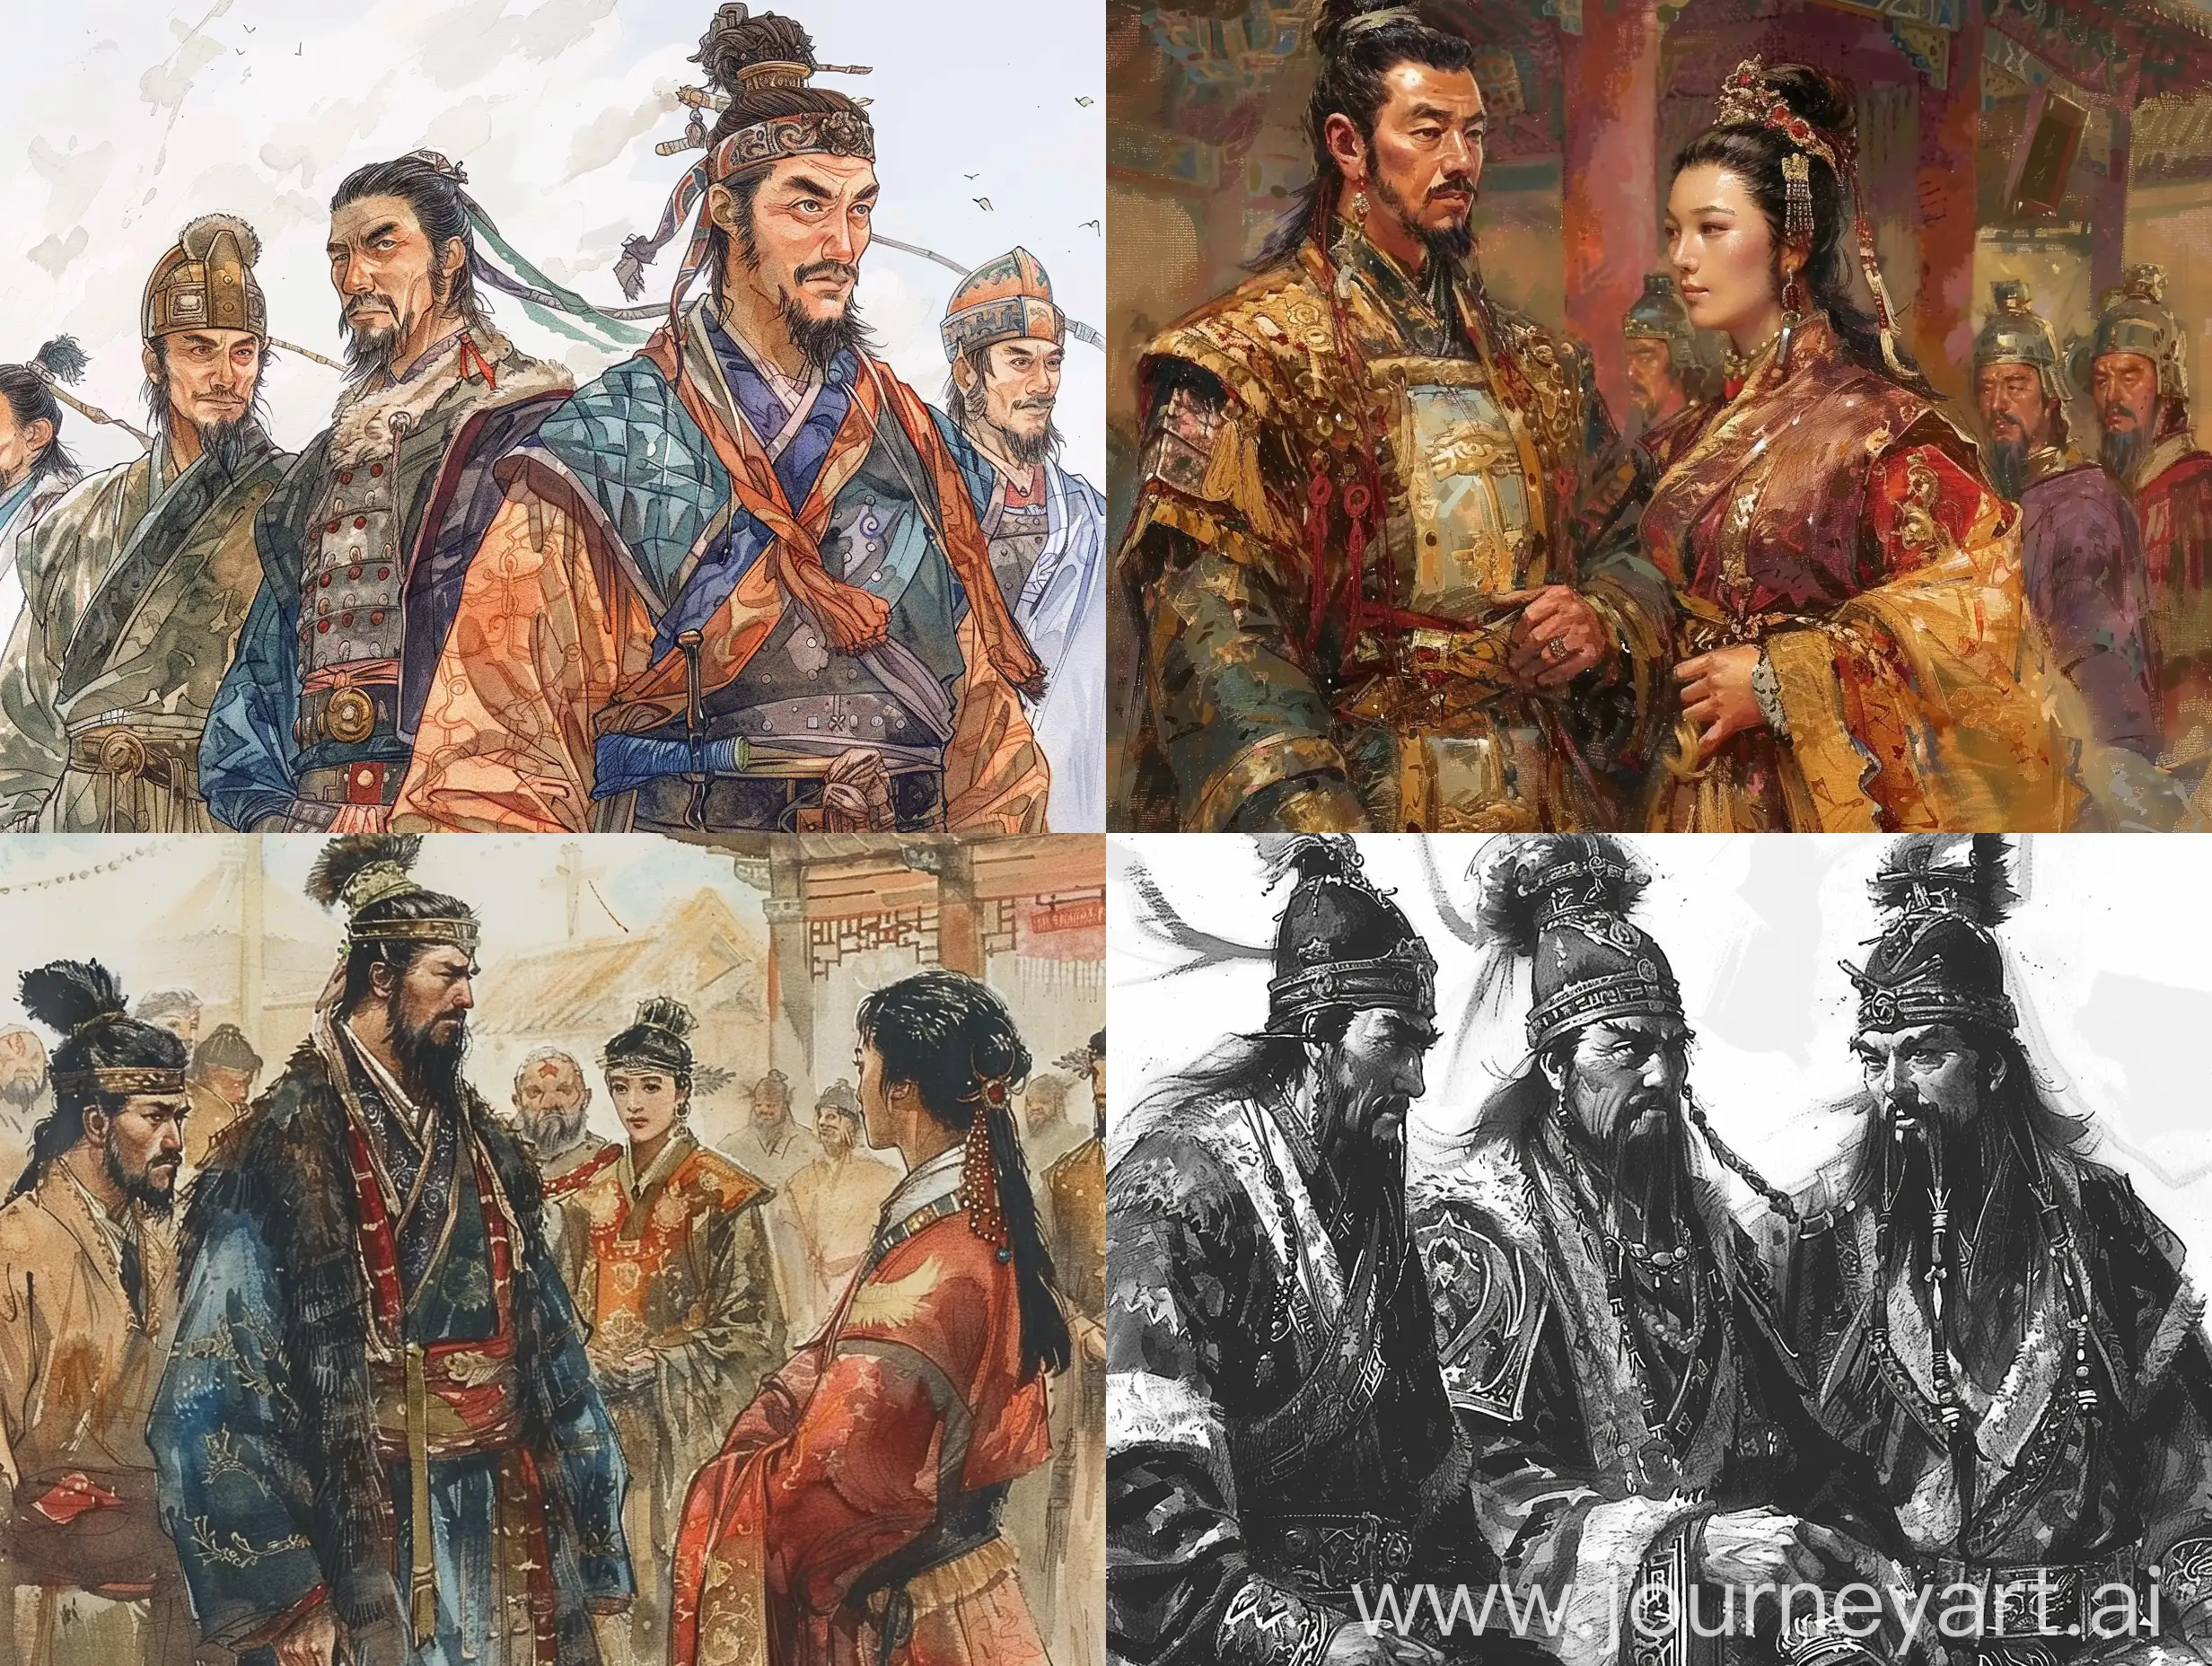 The Xubu tribe was a Hun tribe that existed from the 3rd century BC to the 4th century AD. According to Chinese records, the Xubu tribe replaced the Huyan tribe, an earlier matrilineal dynastic tribe. Traditional marriage unions were a form of nomadic exogamous society. Male members of the matrilineal dynastic line, only male members of the Luandi line, whose father was Luanti Chanyu and whose mother was Xubu Khatun (Queen), were considered eligible for the highest throne. A Xubu could only become a Chanyu after a palace coup.